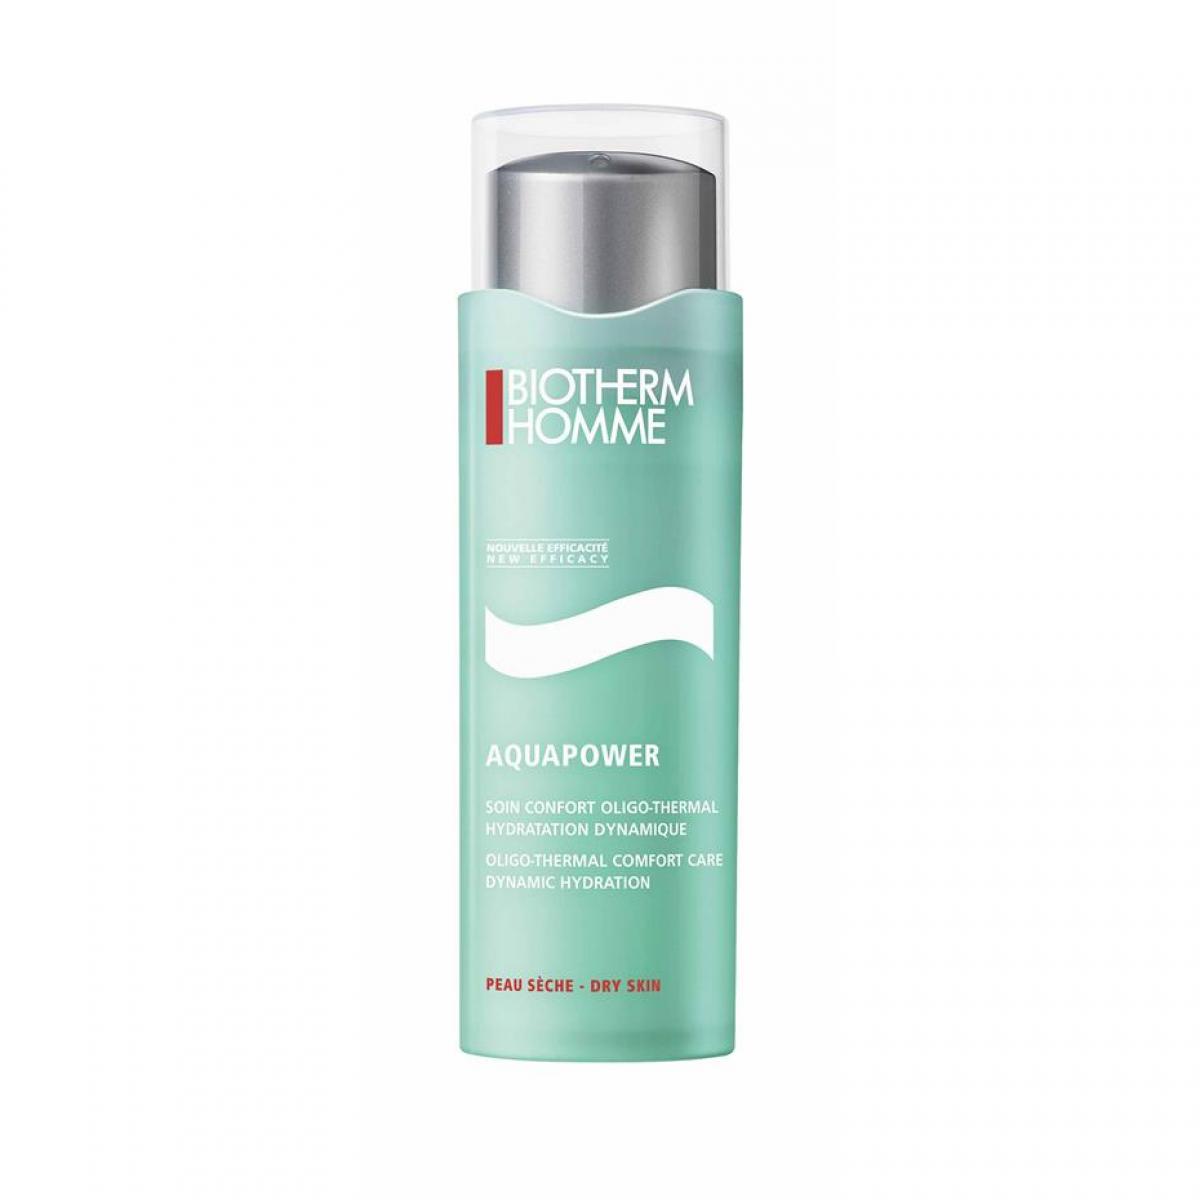 Soin Aquapower, Biotherm, 32,50€